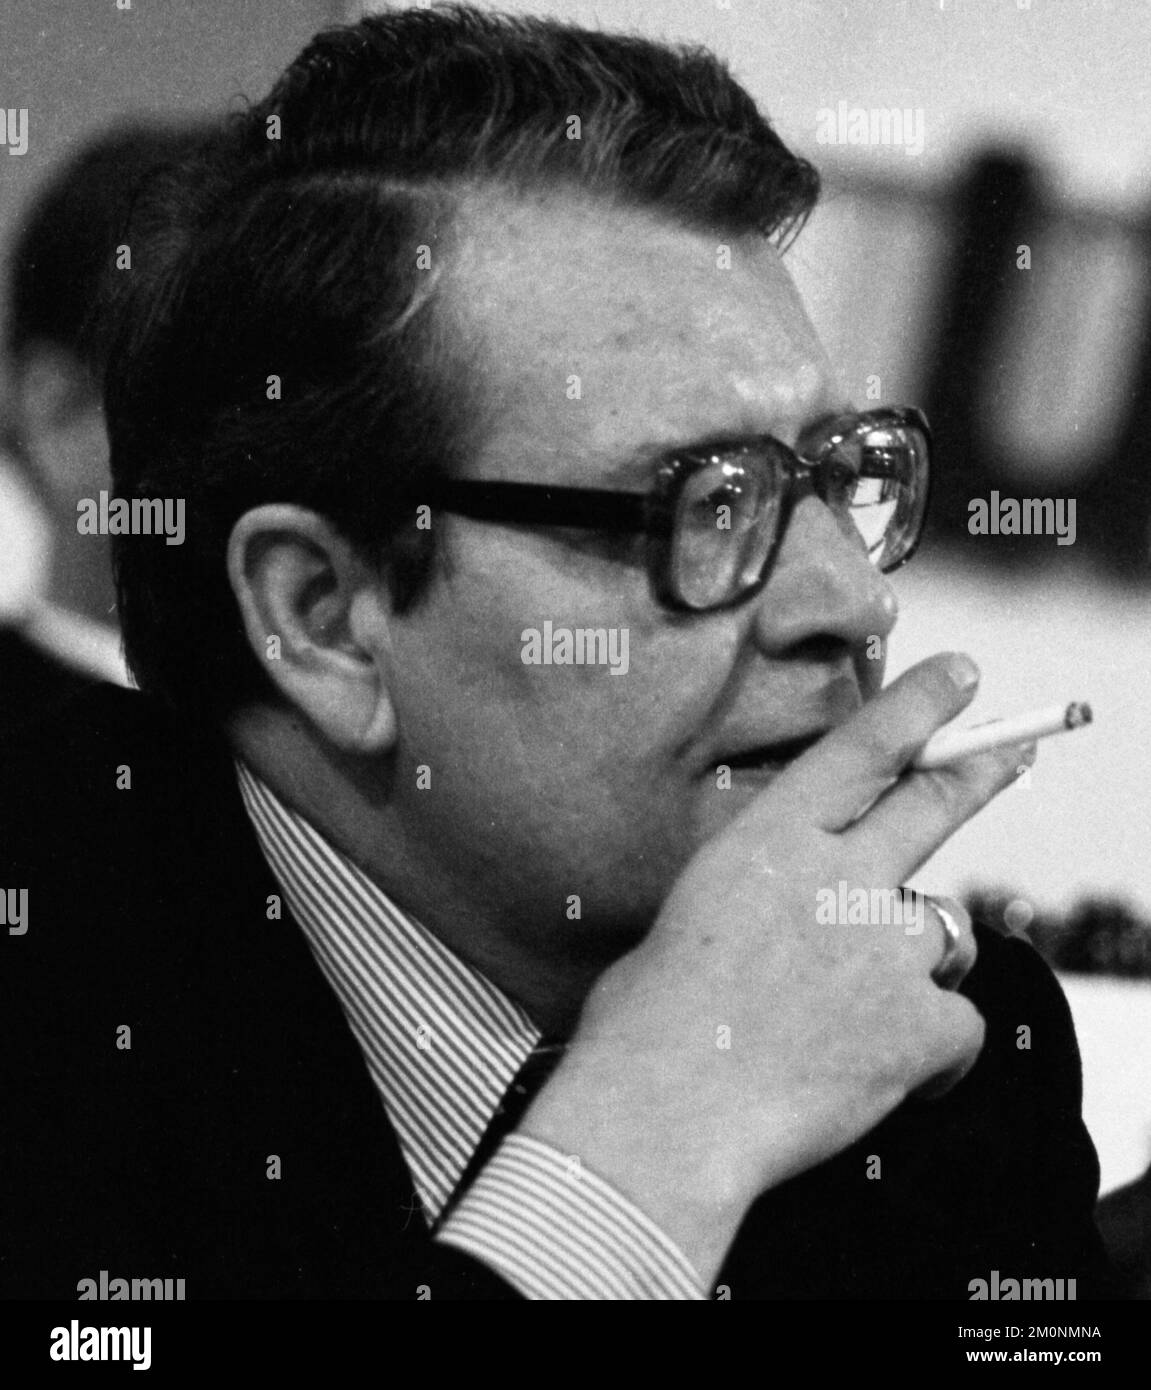 The Party Congress of the Christian Democratic Union (CDU) on 24.5.1976 in Hanover, Heinrich Köppler, Germany, Europe Stock Photo